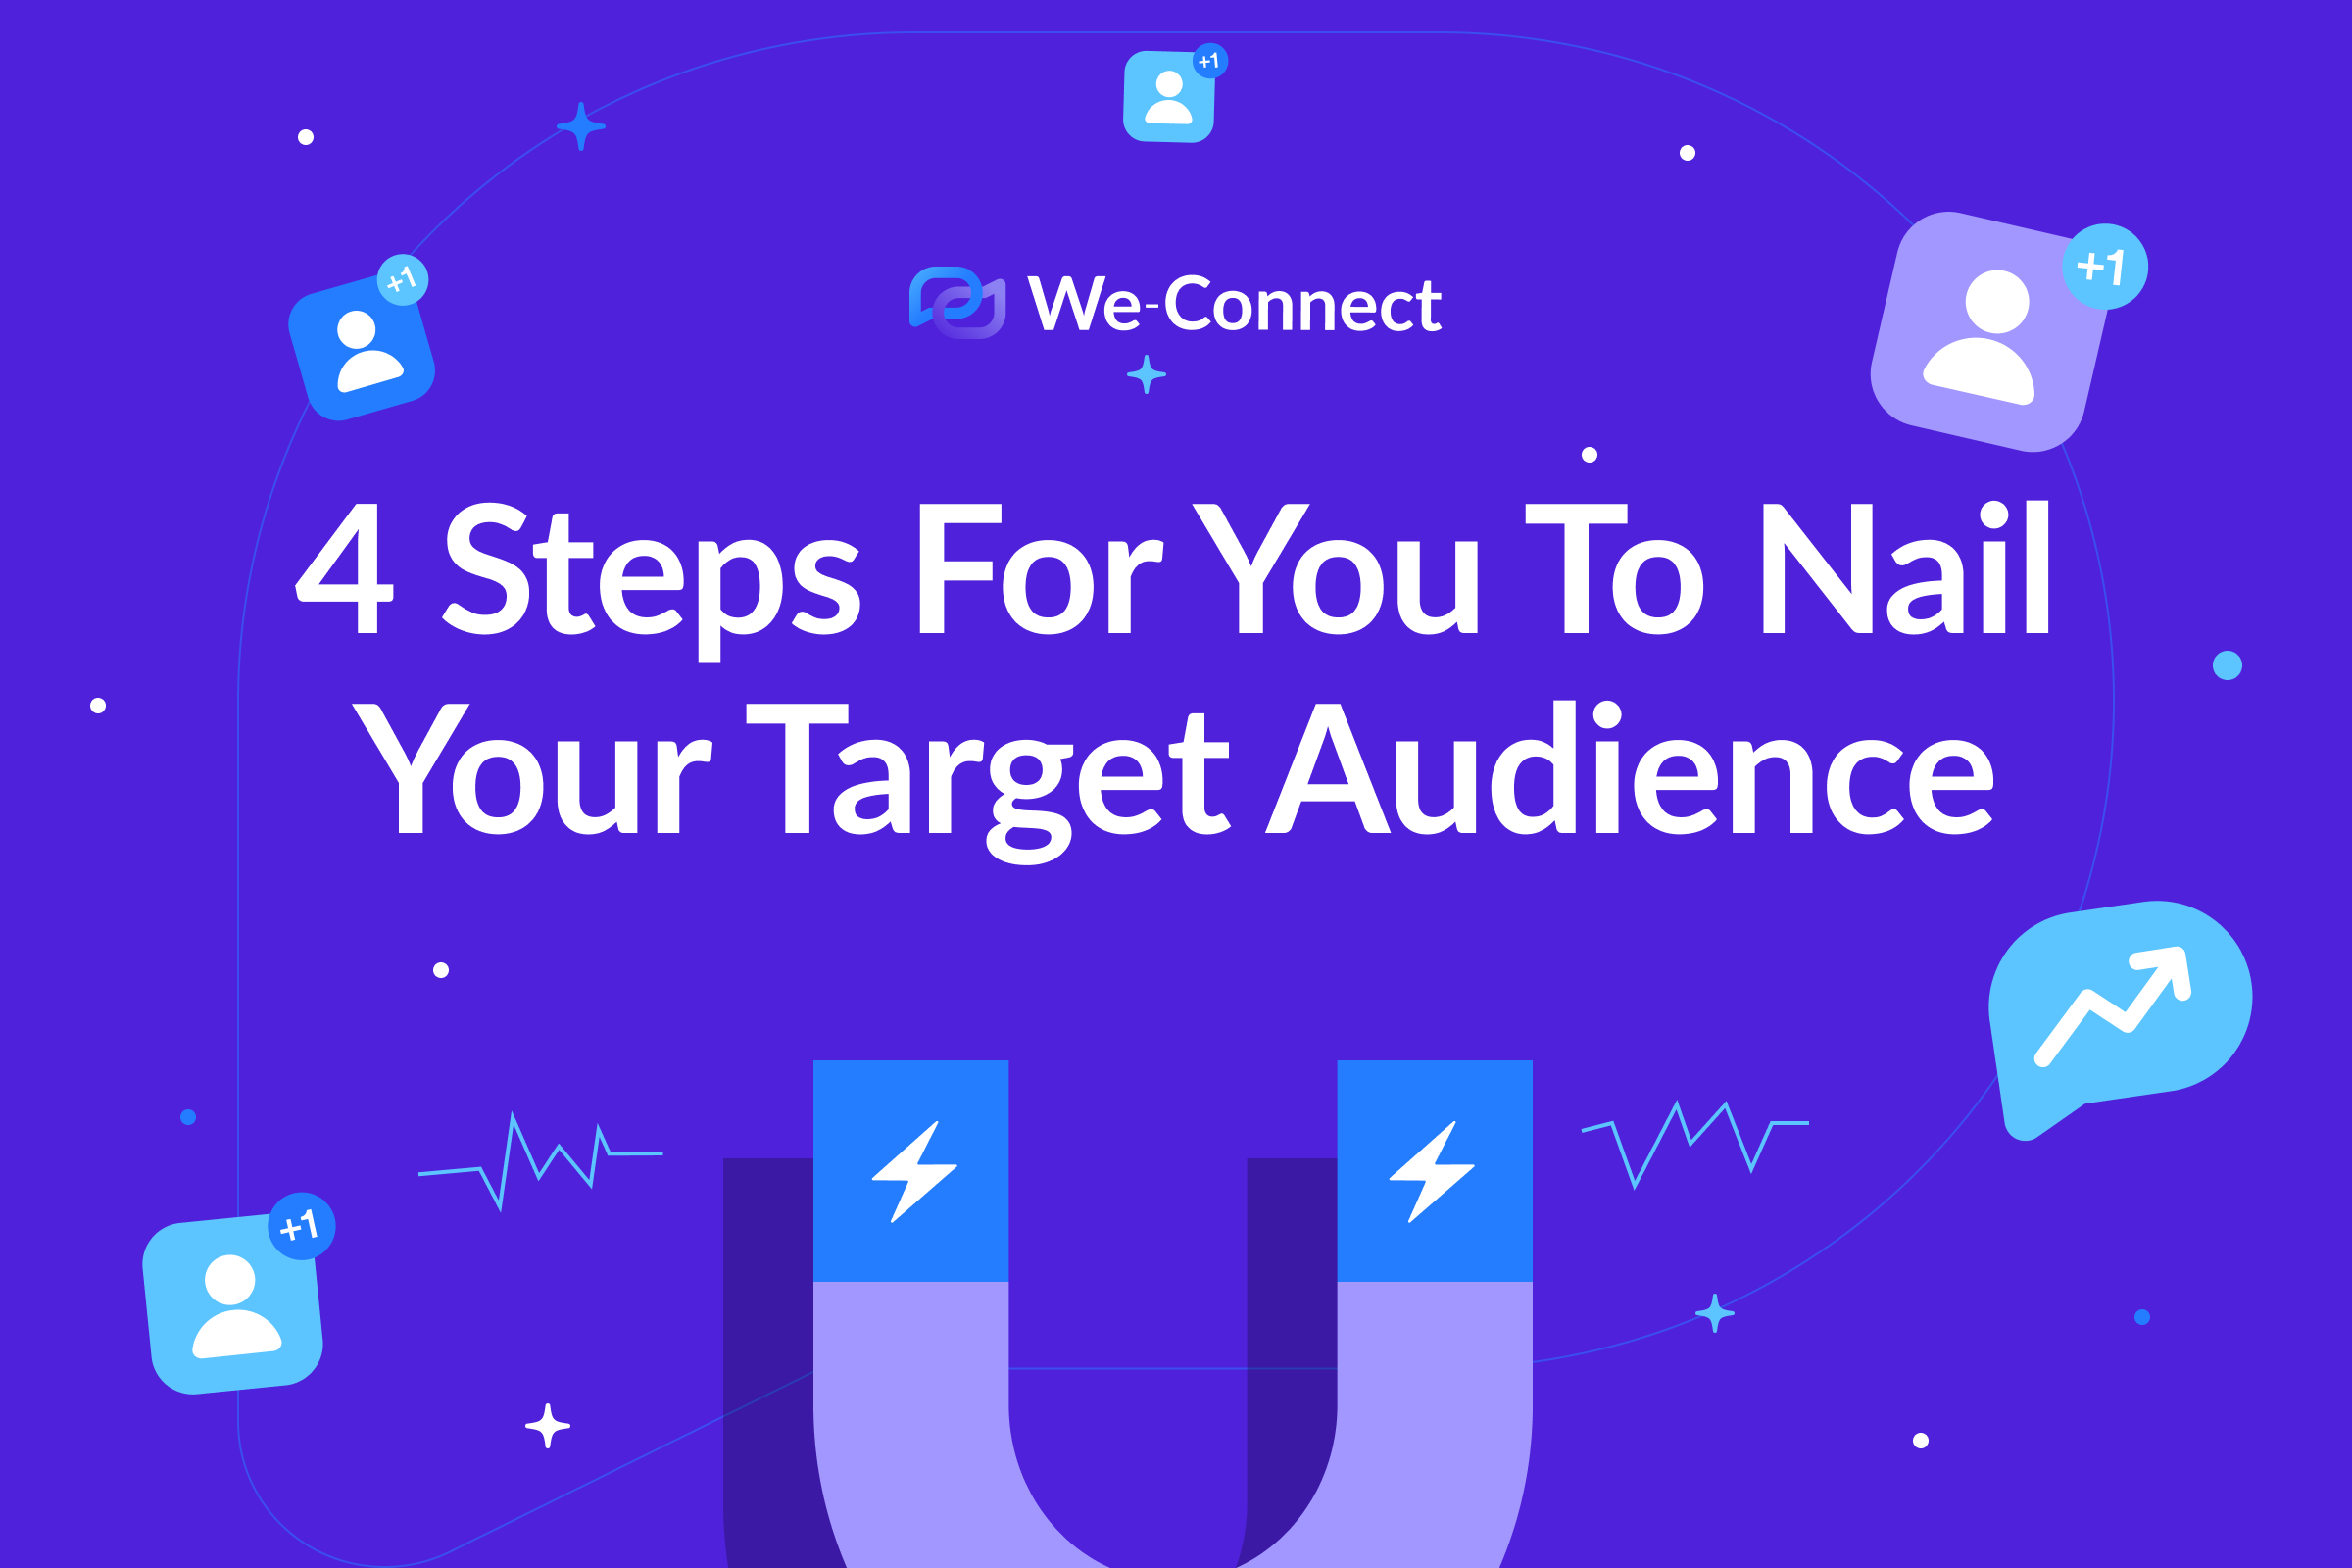 4 Steps For You To Nail Your Target Audience